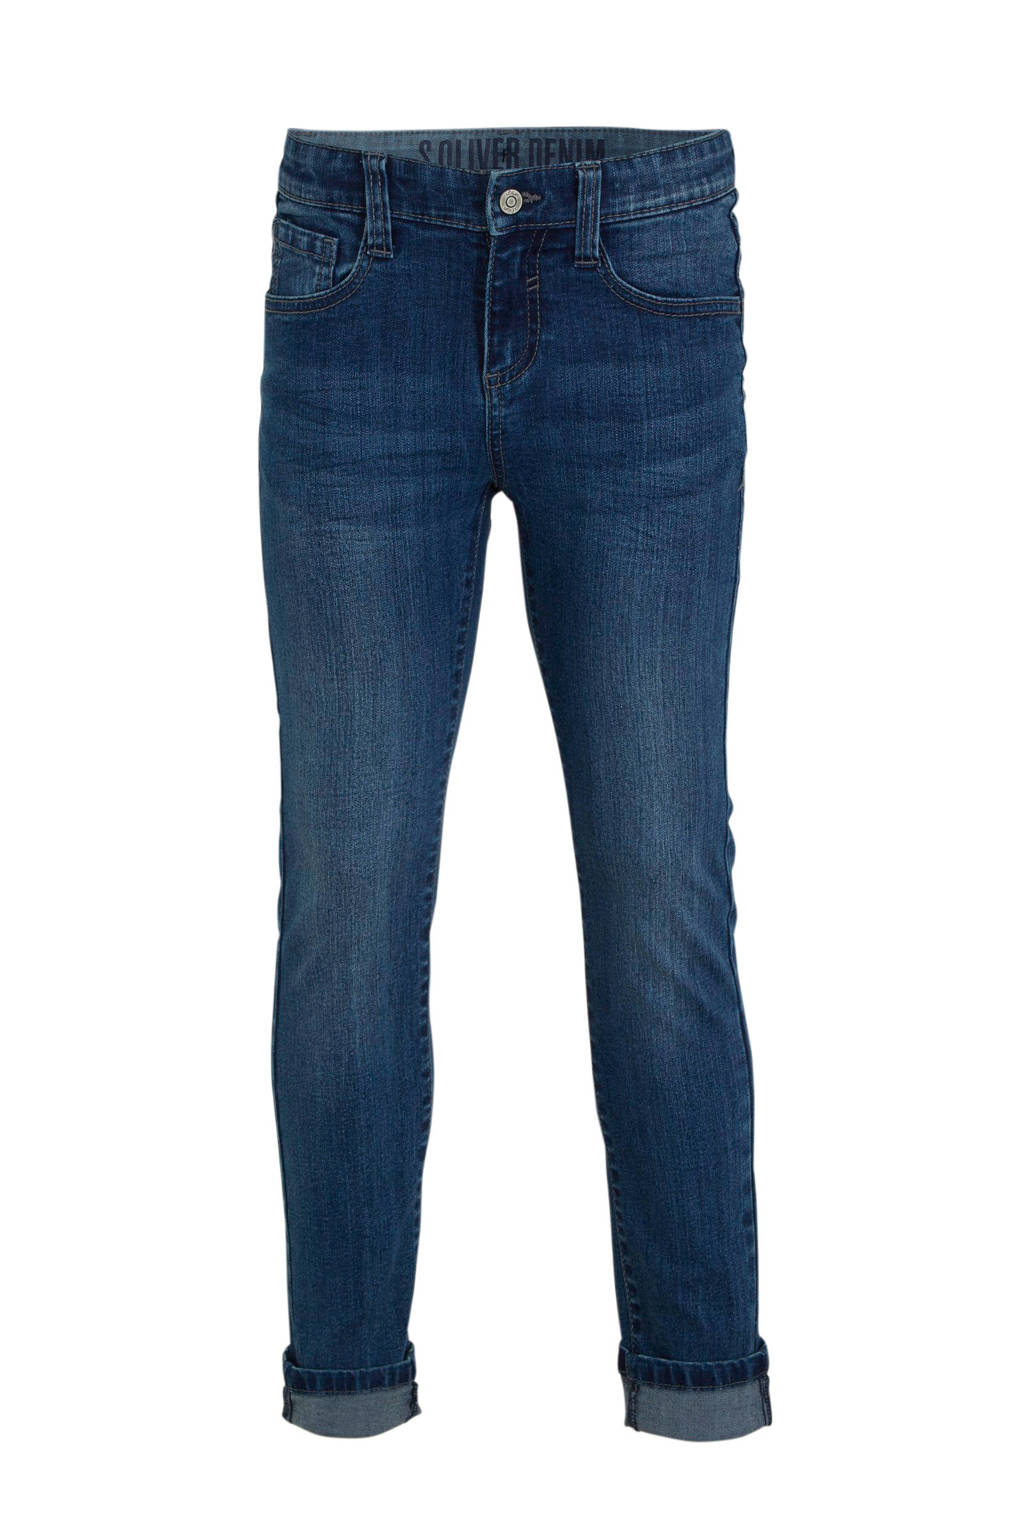 s.Oliver slim fit jeans donkerblauw, Donkerblauw